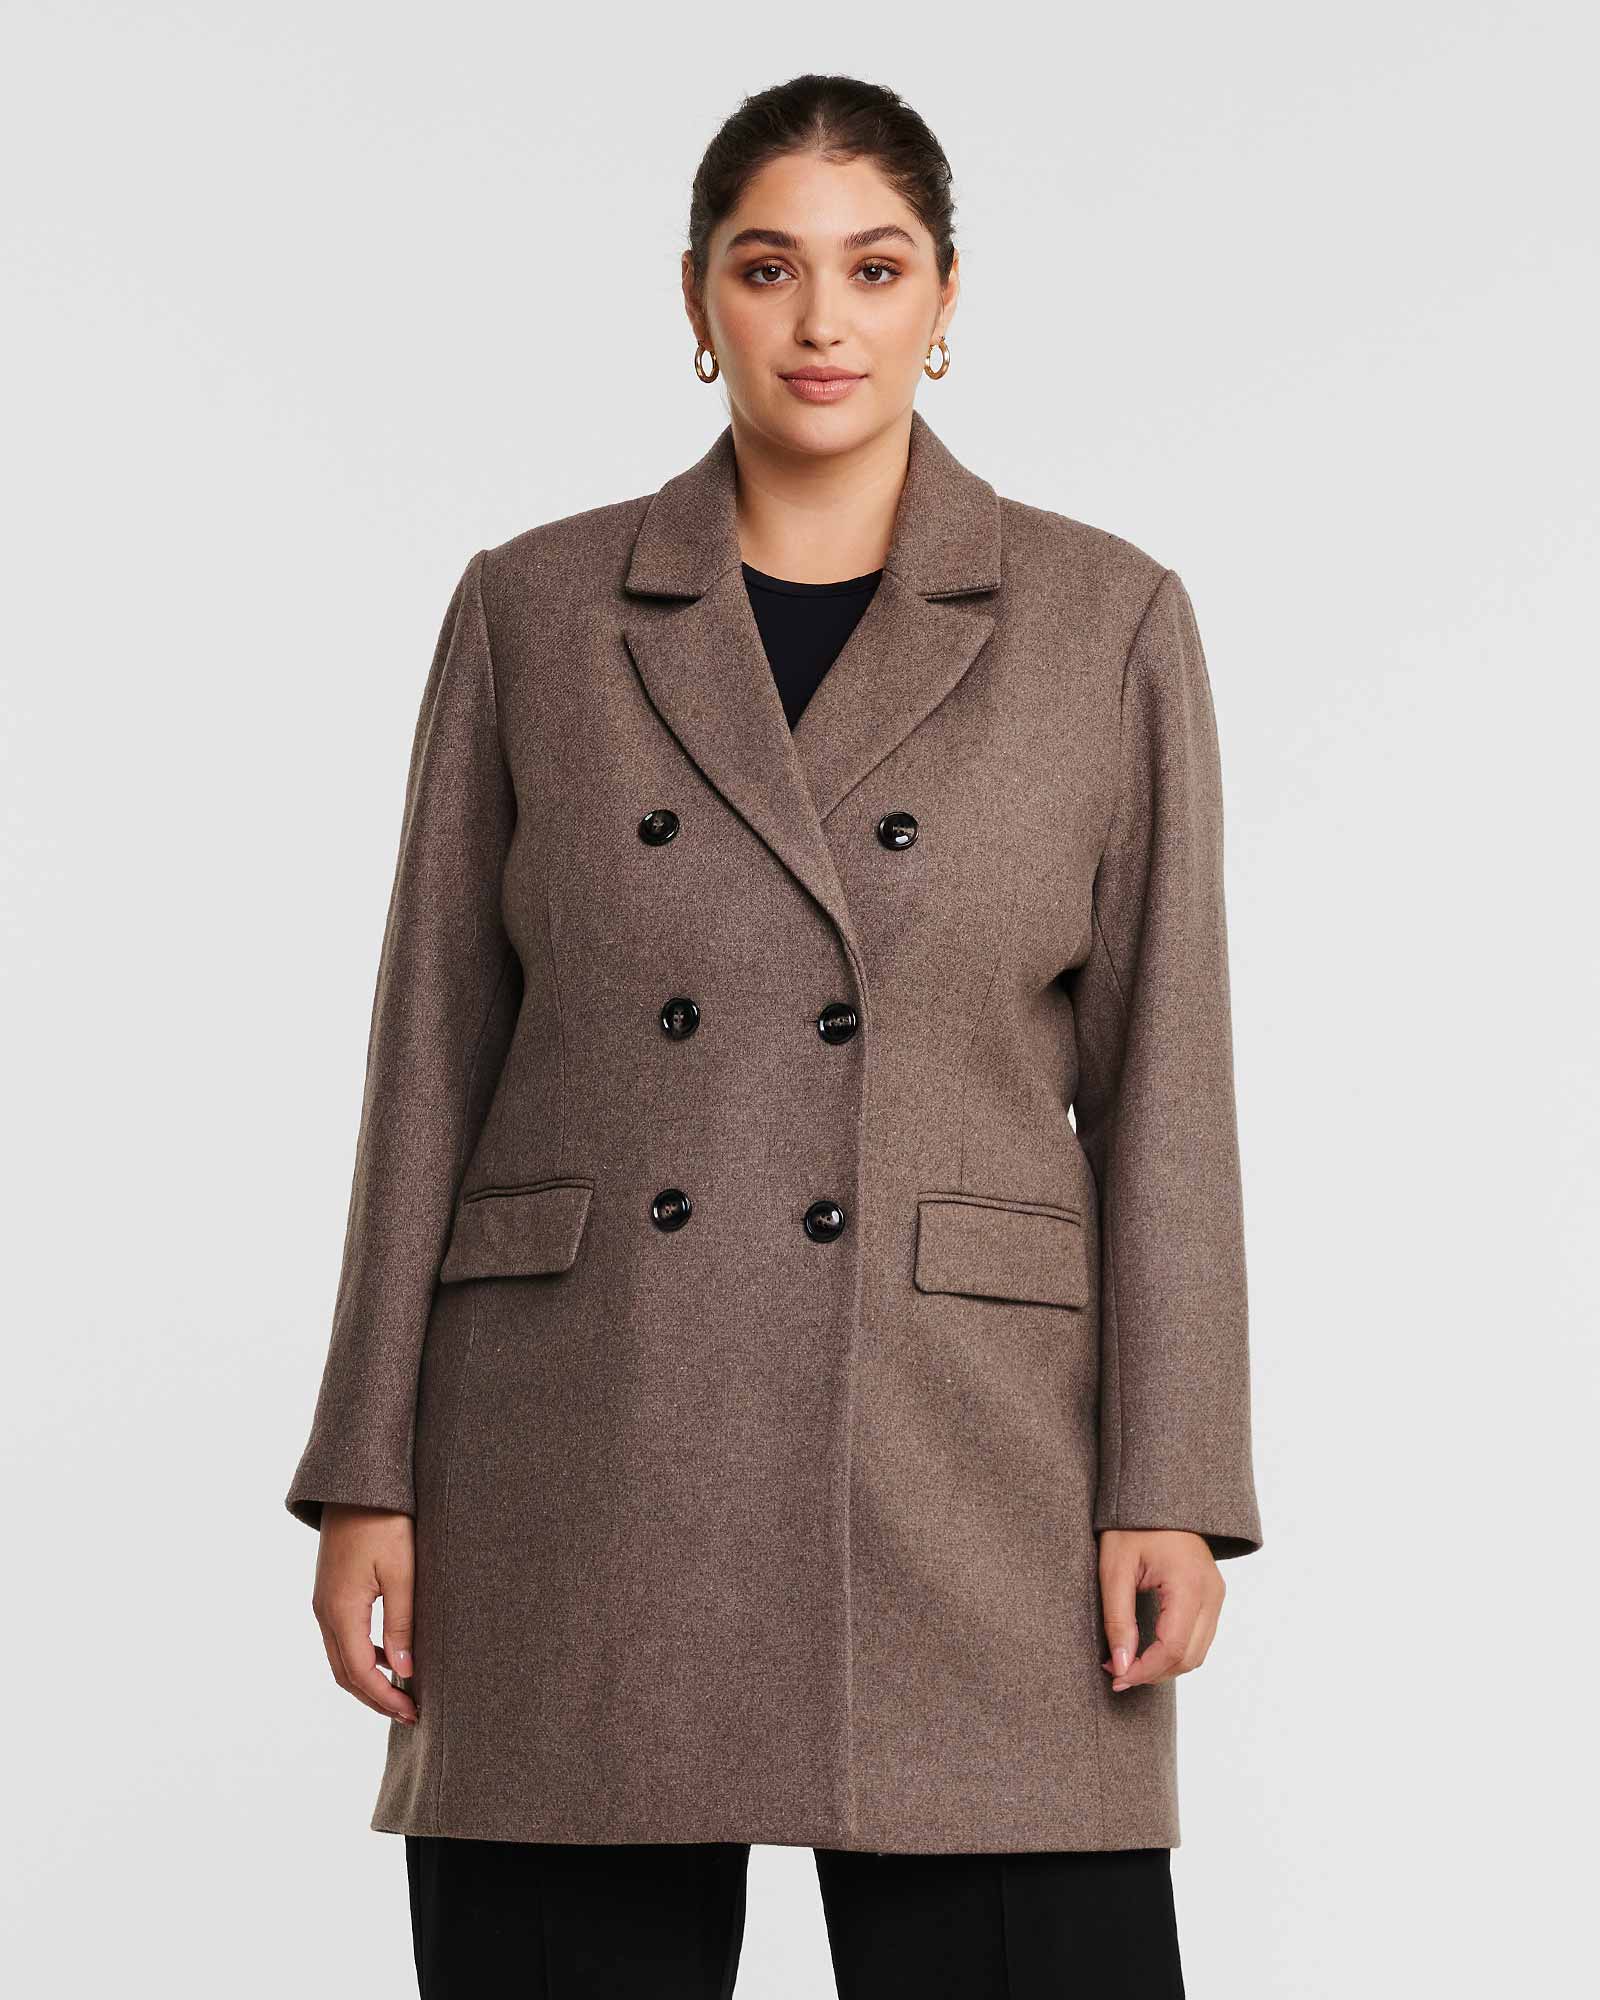 A fully lined plus-size woman wearing the Redford Mocha Brown Double-Breasted Coat.